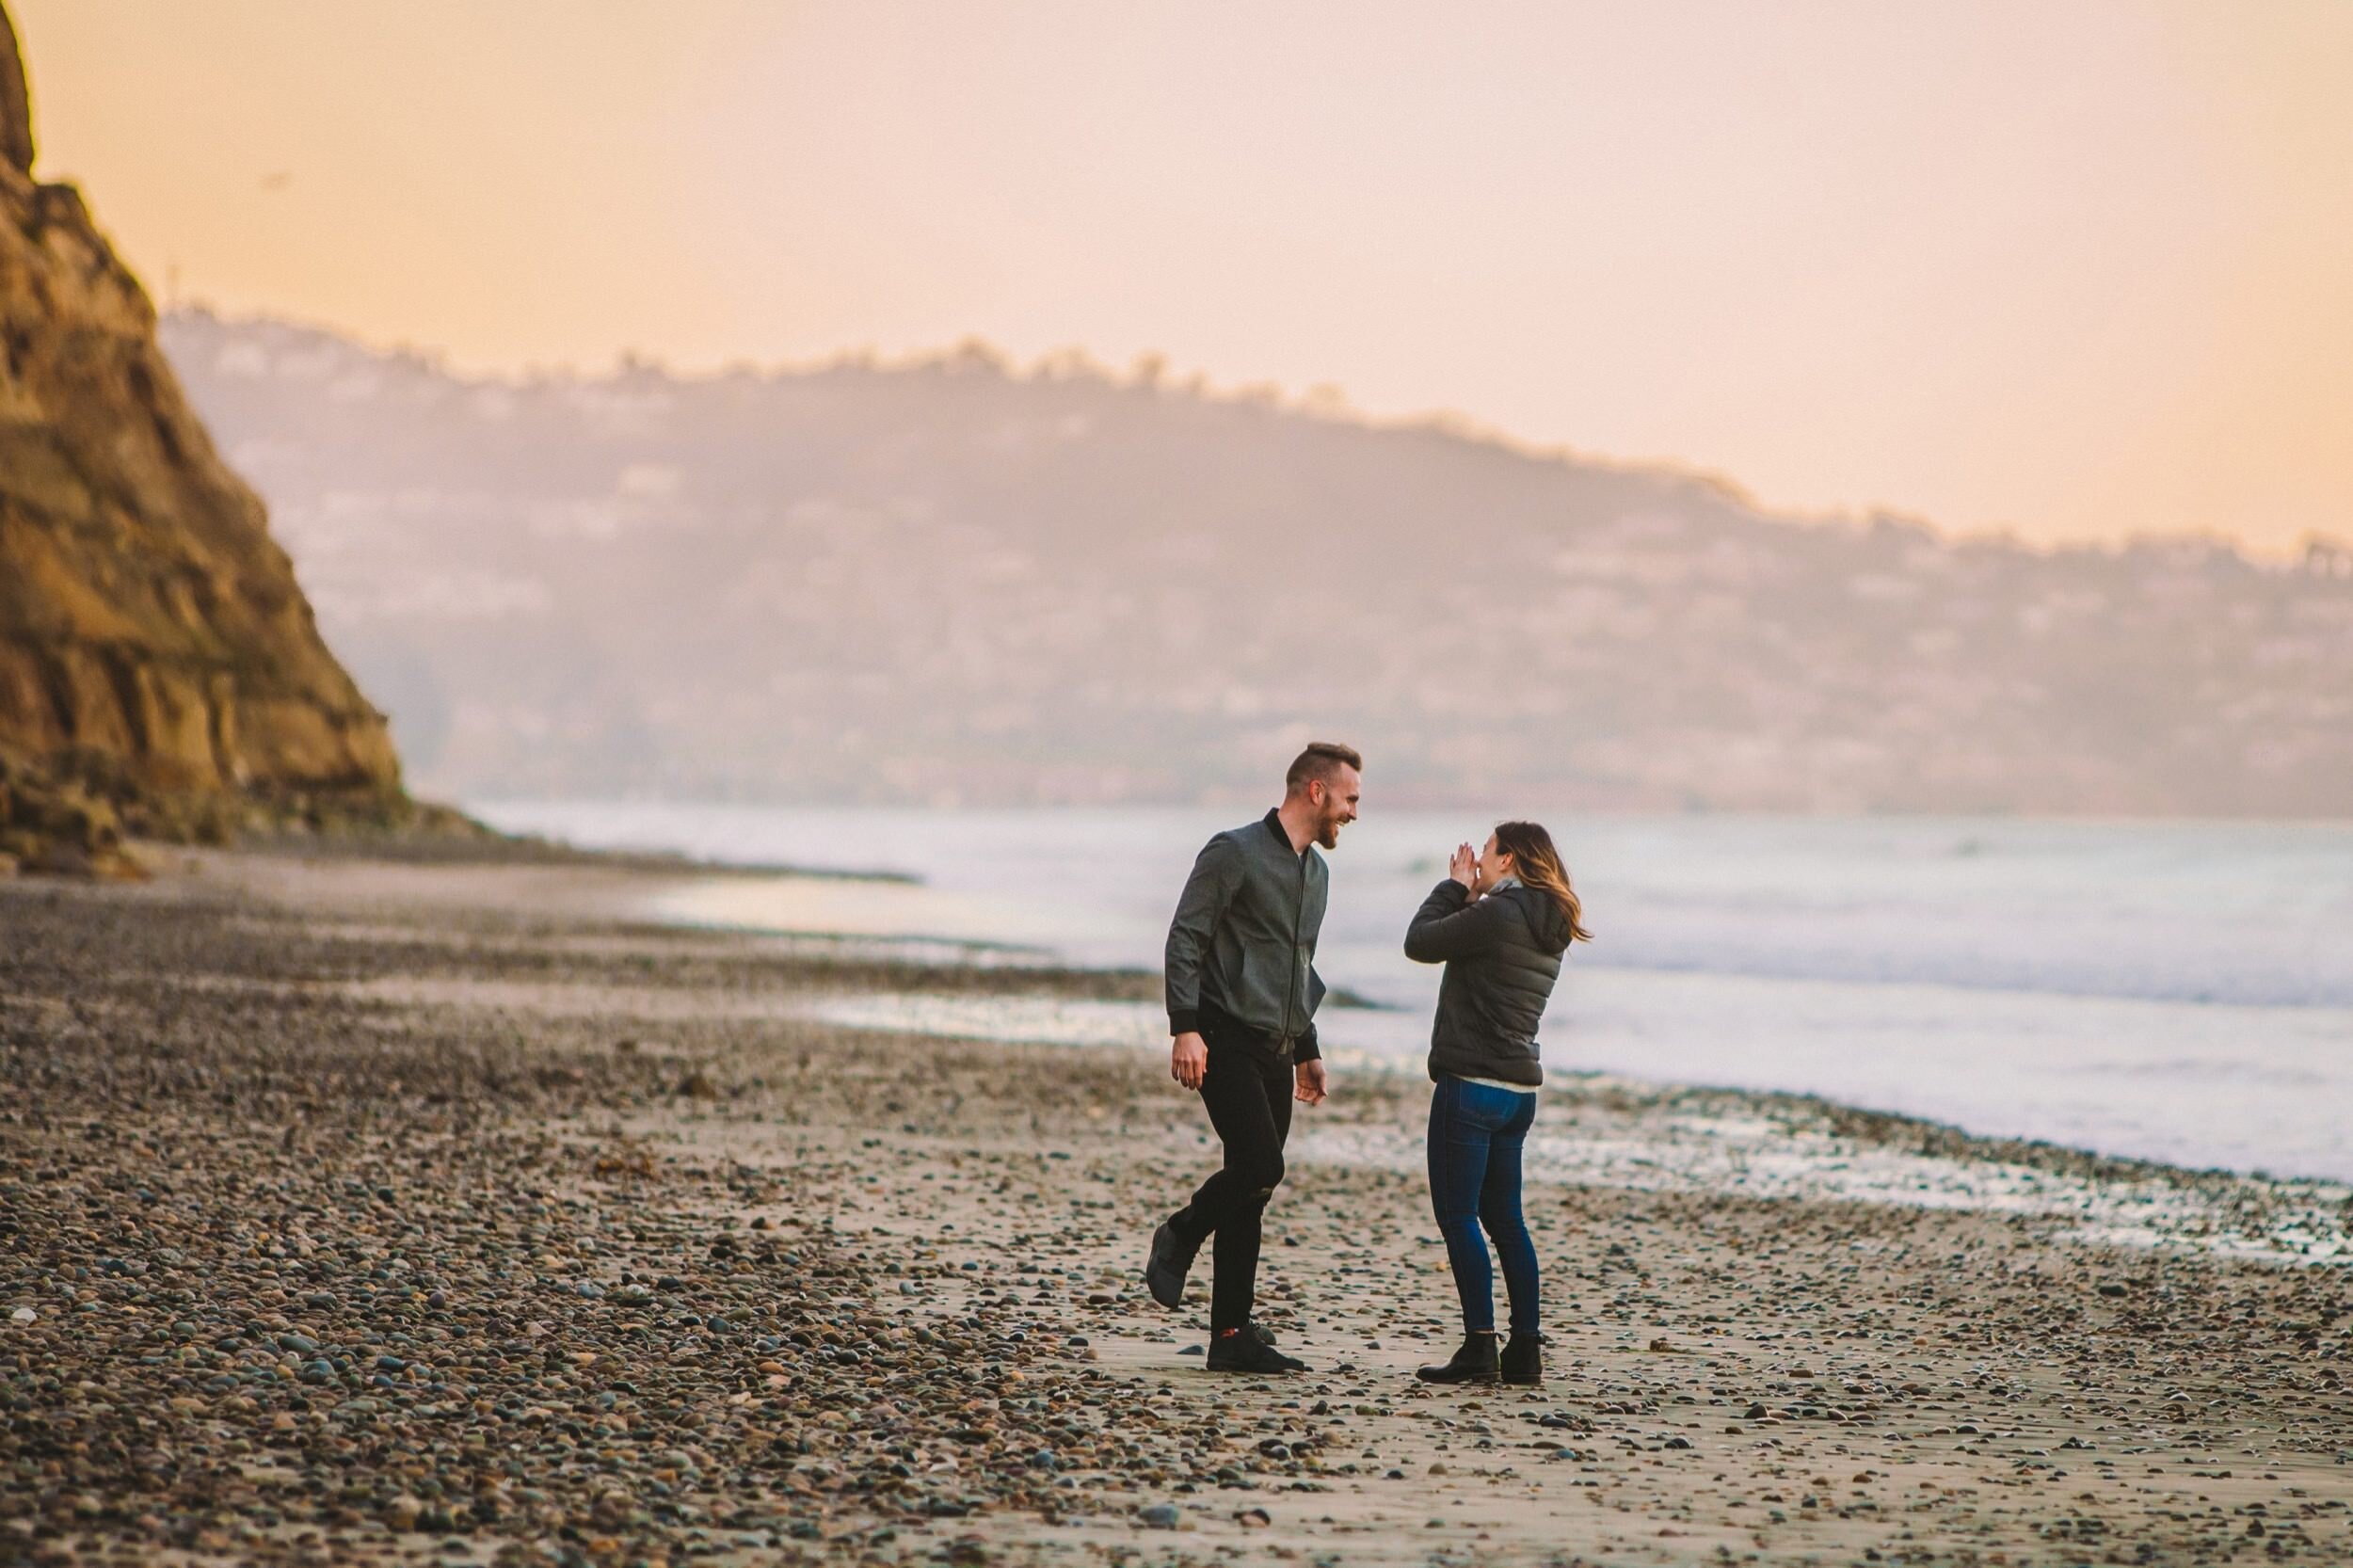 Suprise Proposal & Engagement Photography at Torrey Pines at Sunrise in San Diego-15.jpg